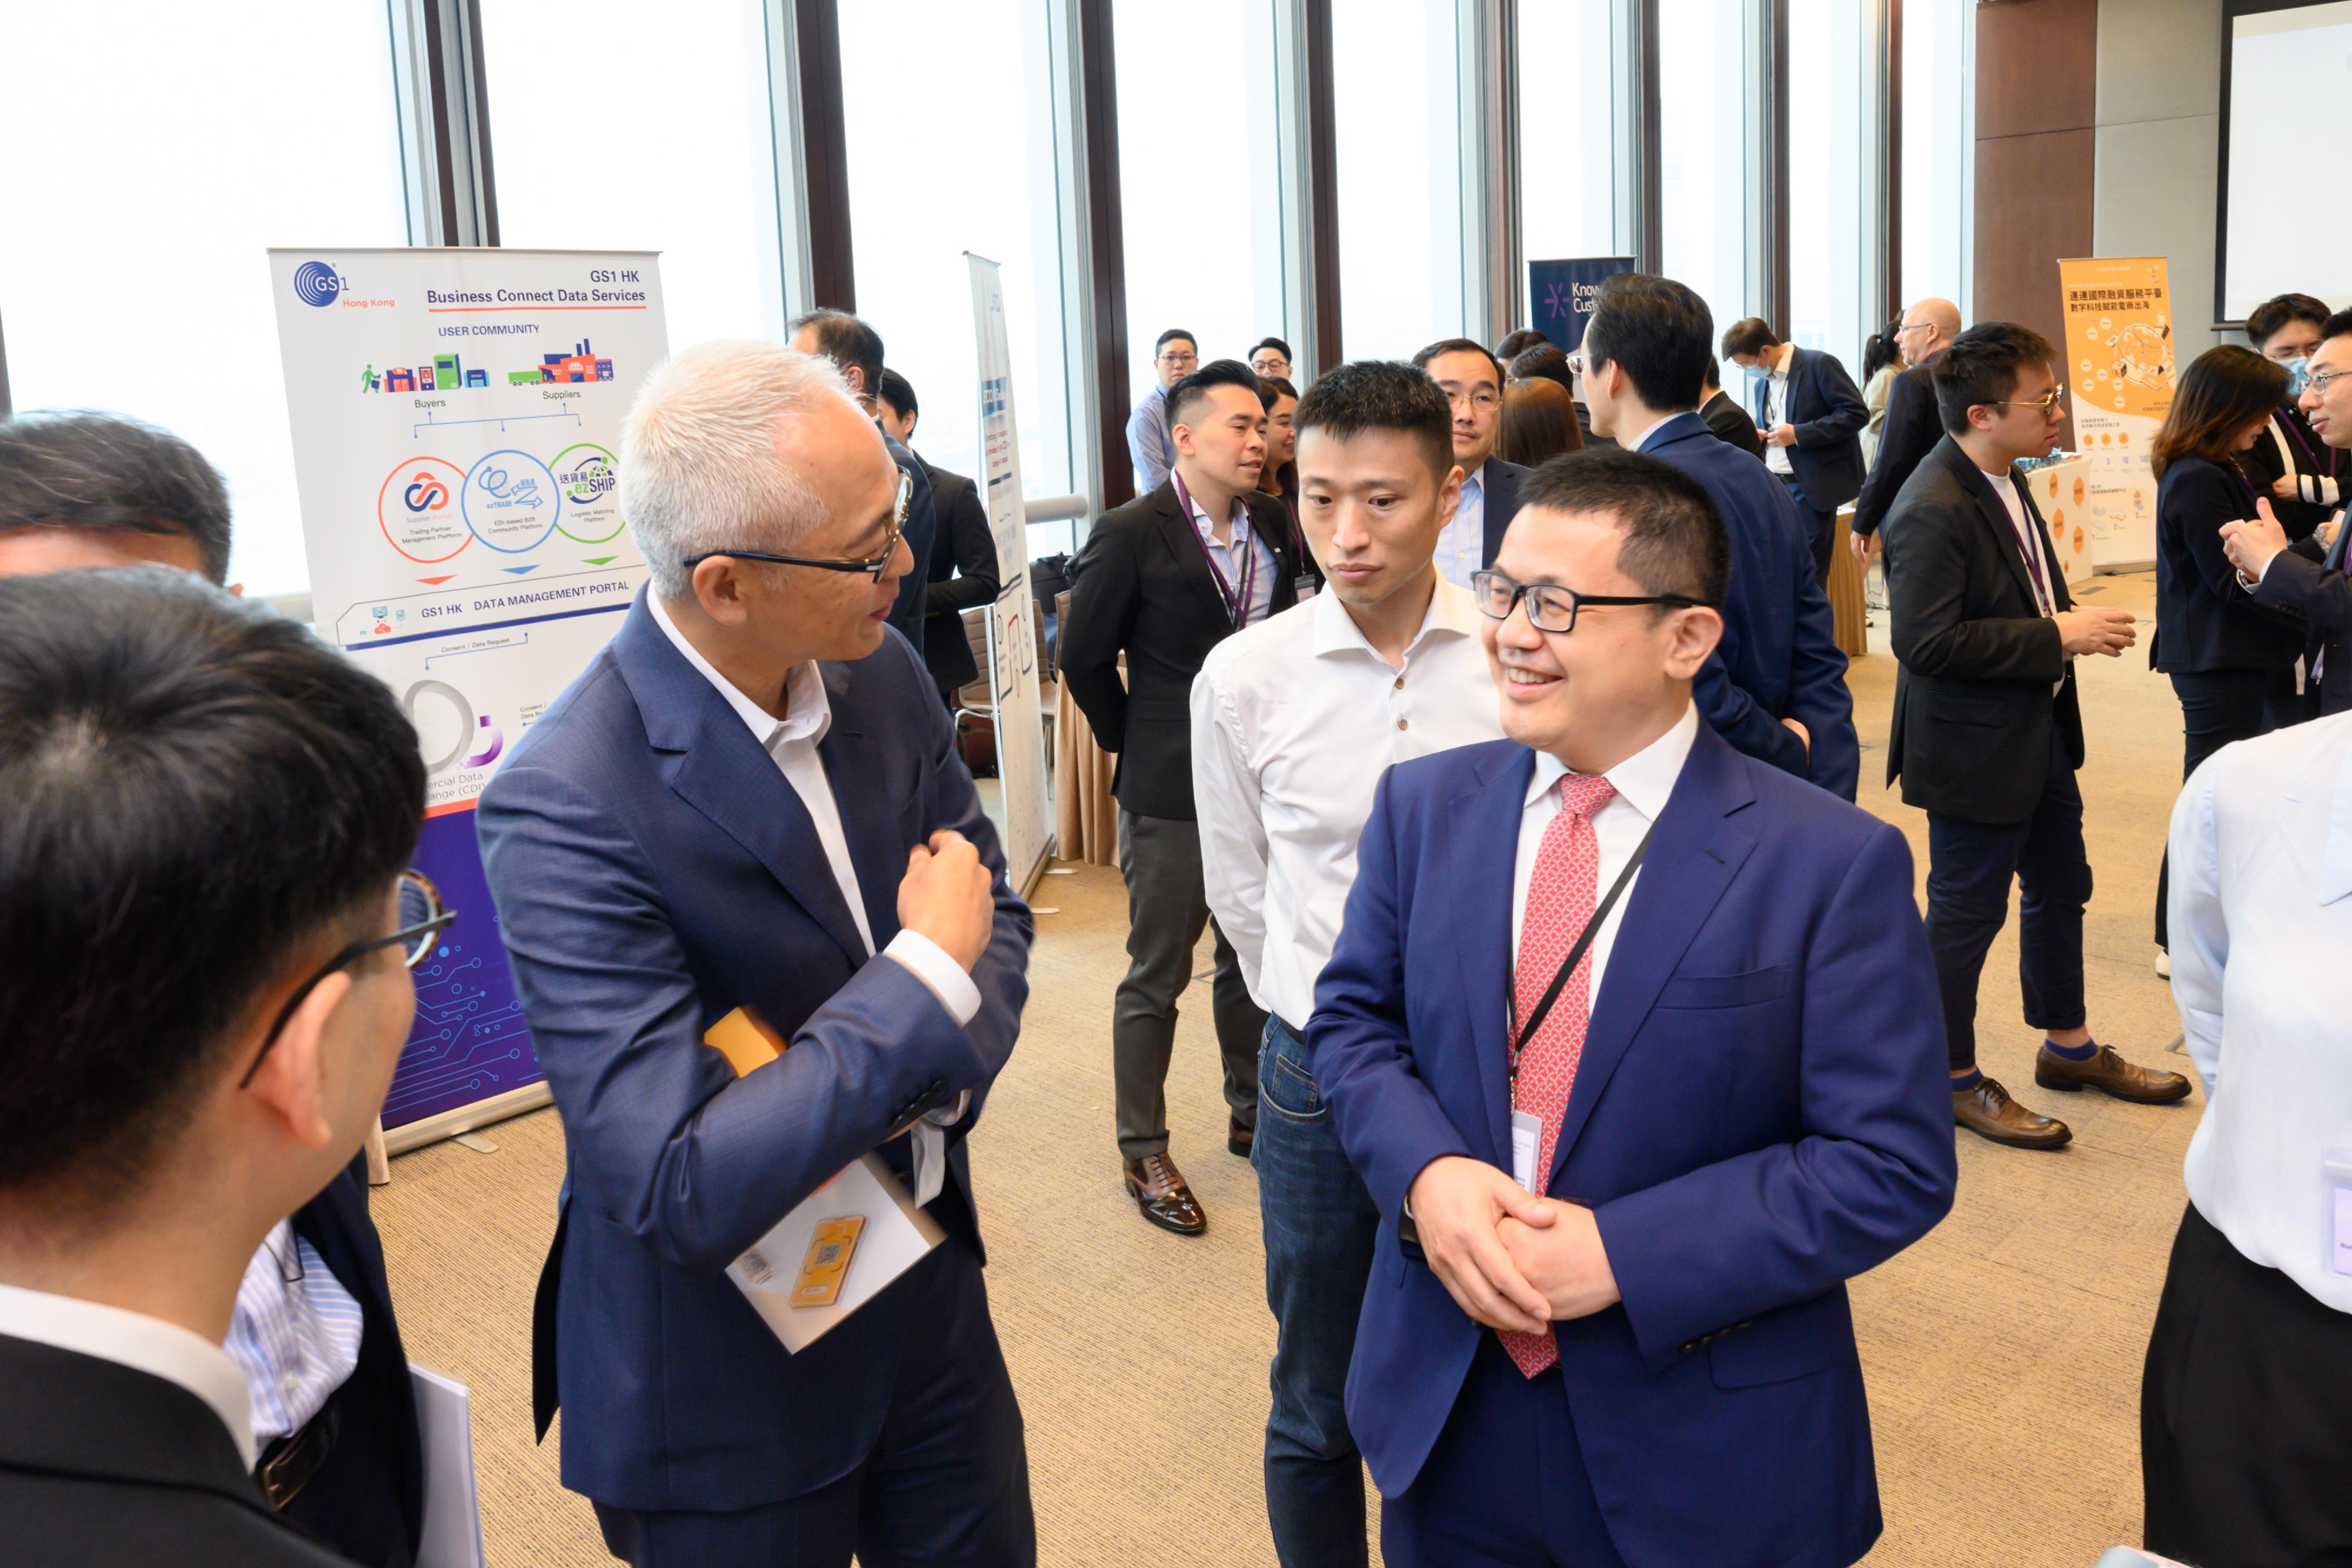 Deputy Chief Executive of the Hong Kong Monetary Authority Mr Howard Lee (left) visits the booths set up by various data analytics service providers and data providers at the Data Summit today (May 4).
